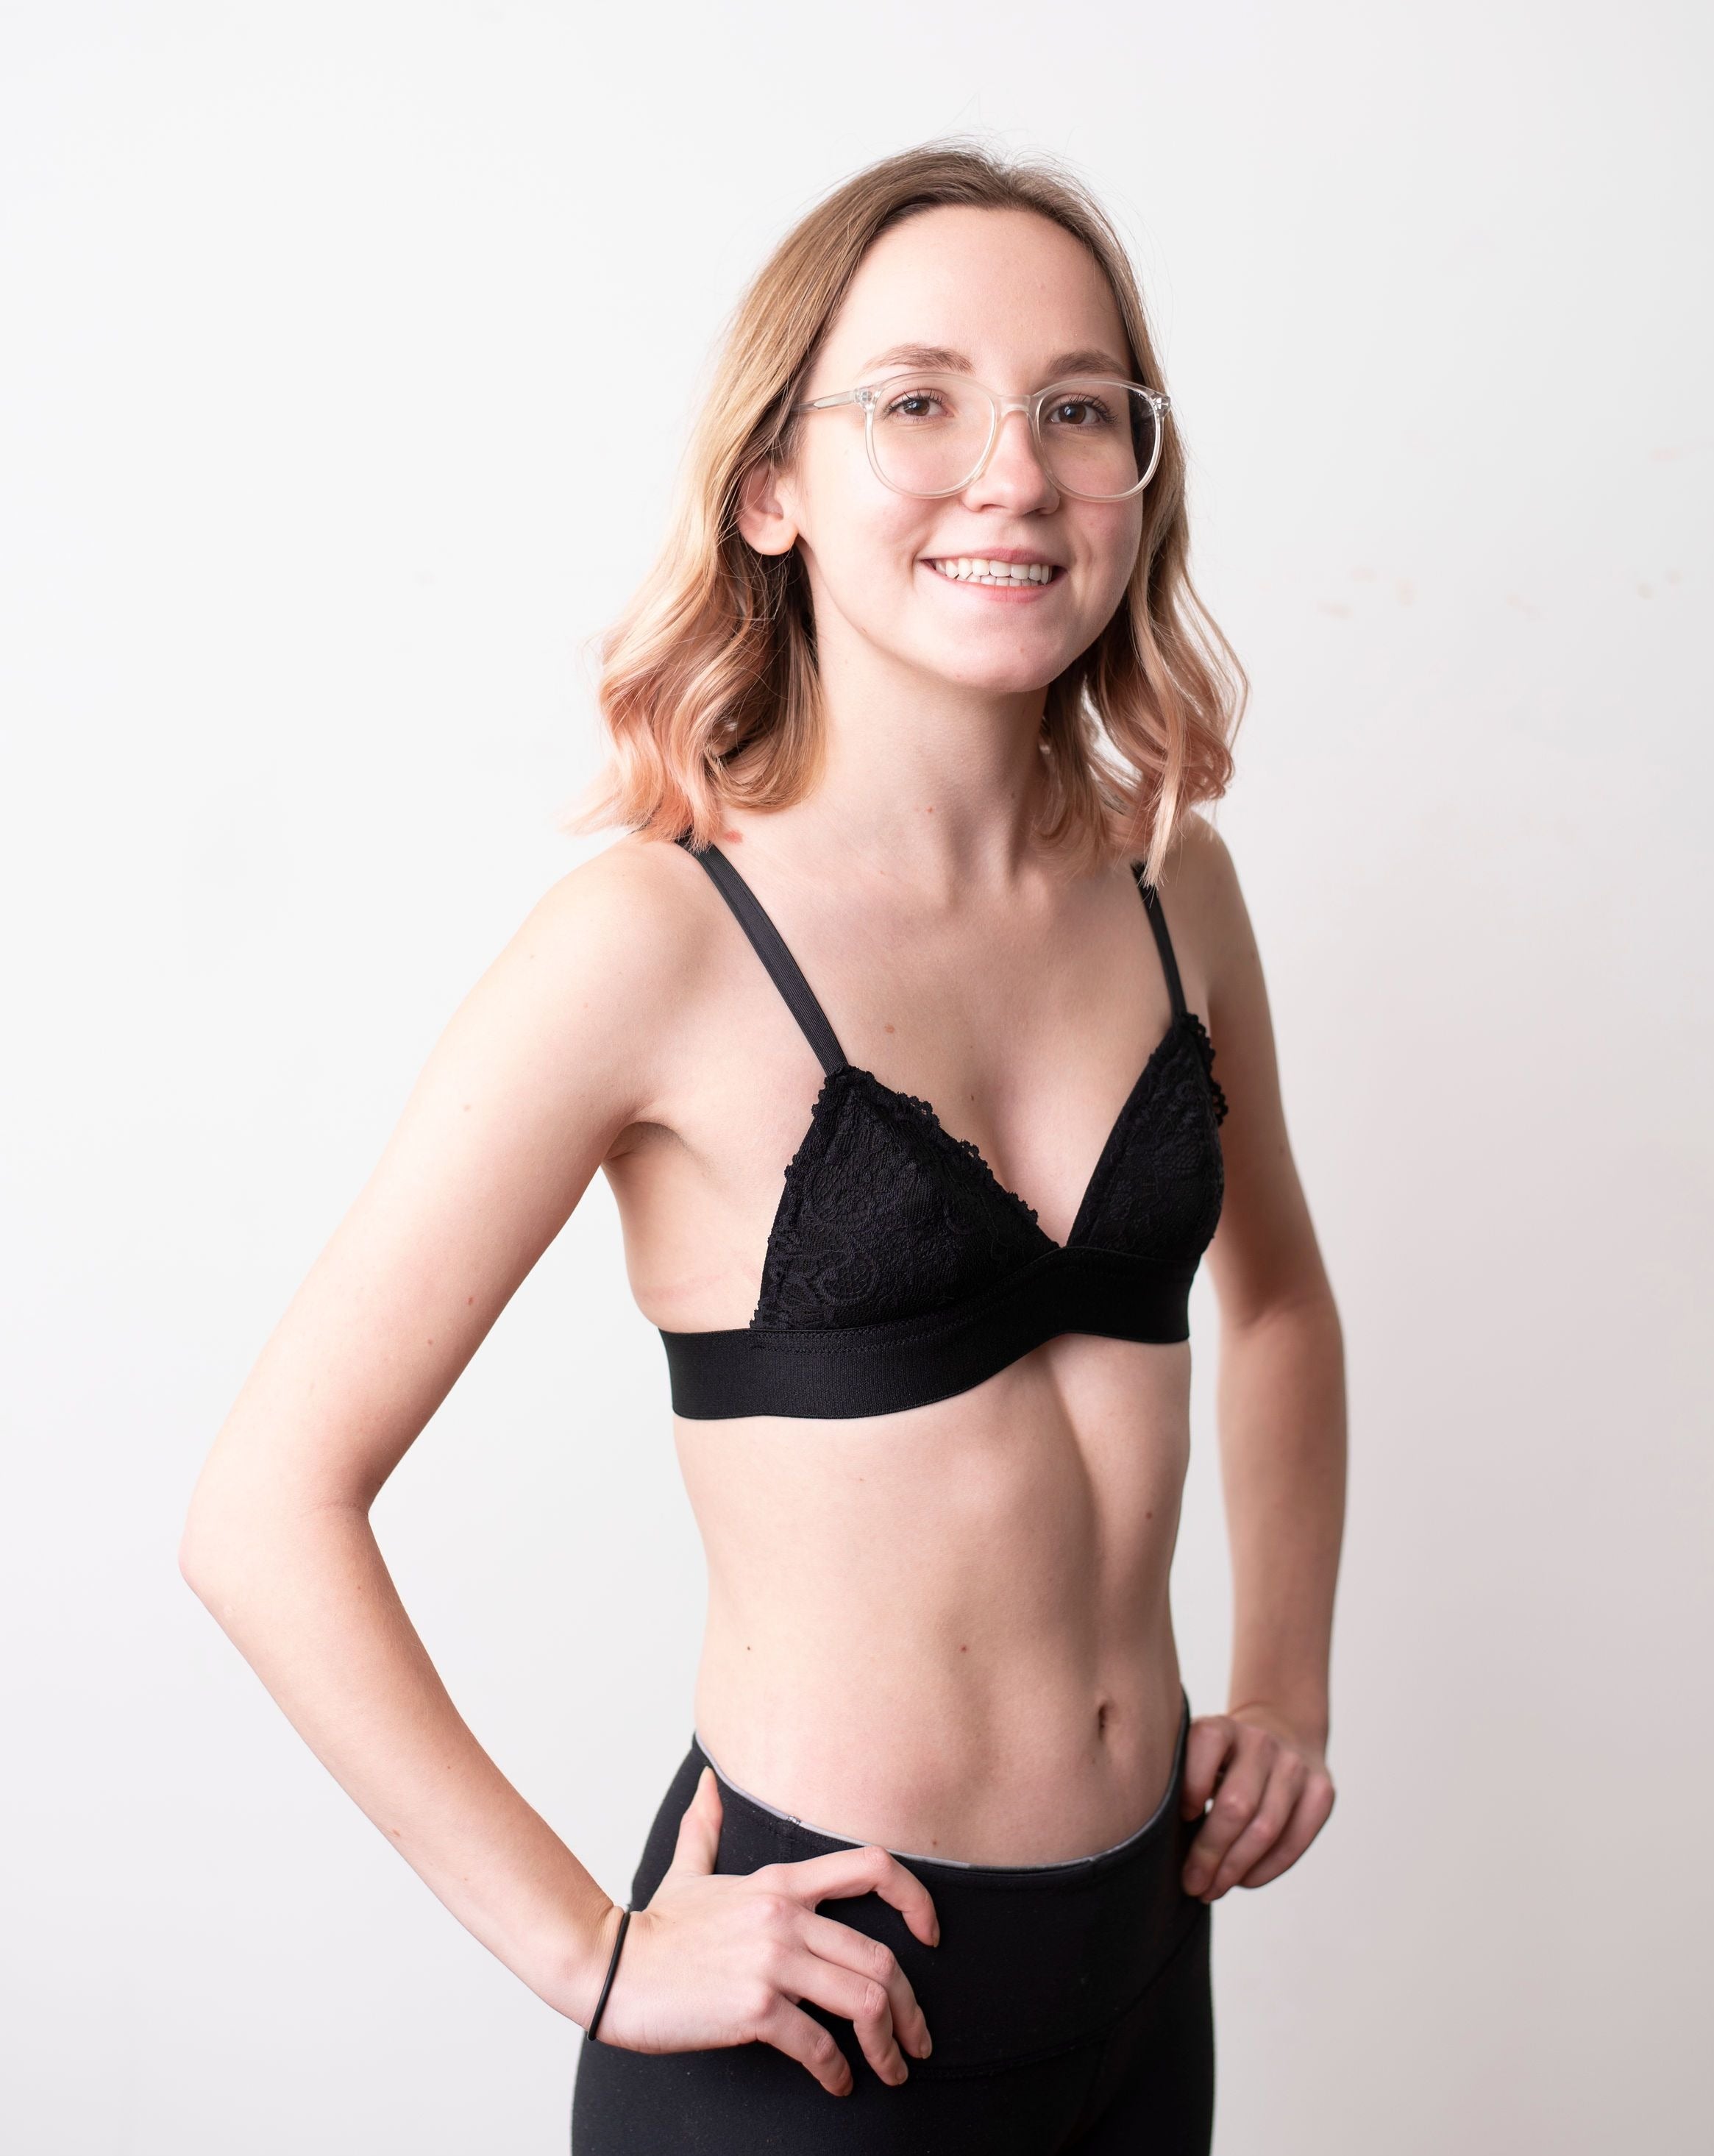 A Cup Bras, Bras for Small Breasts